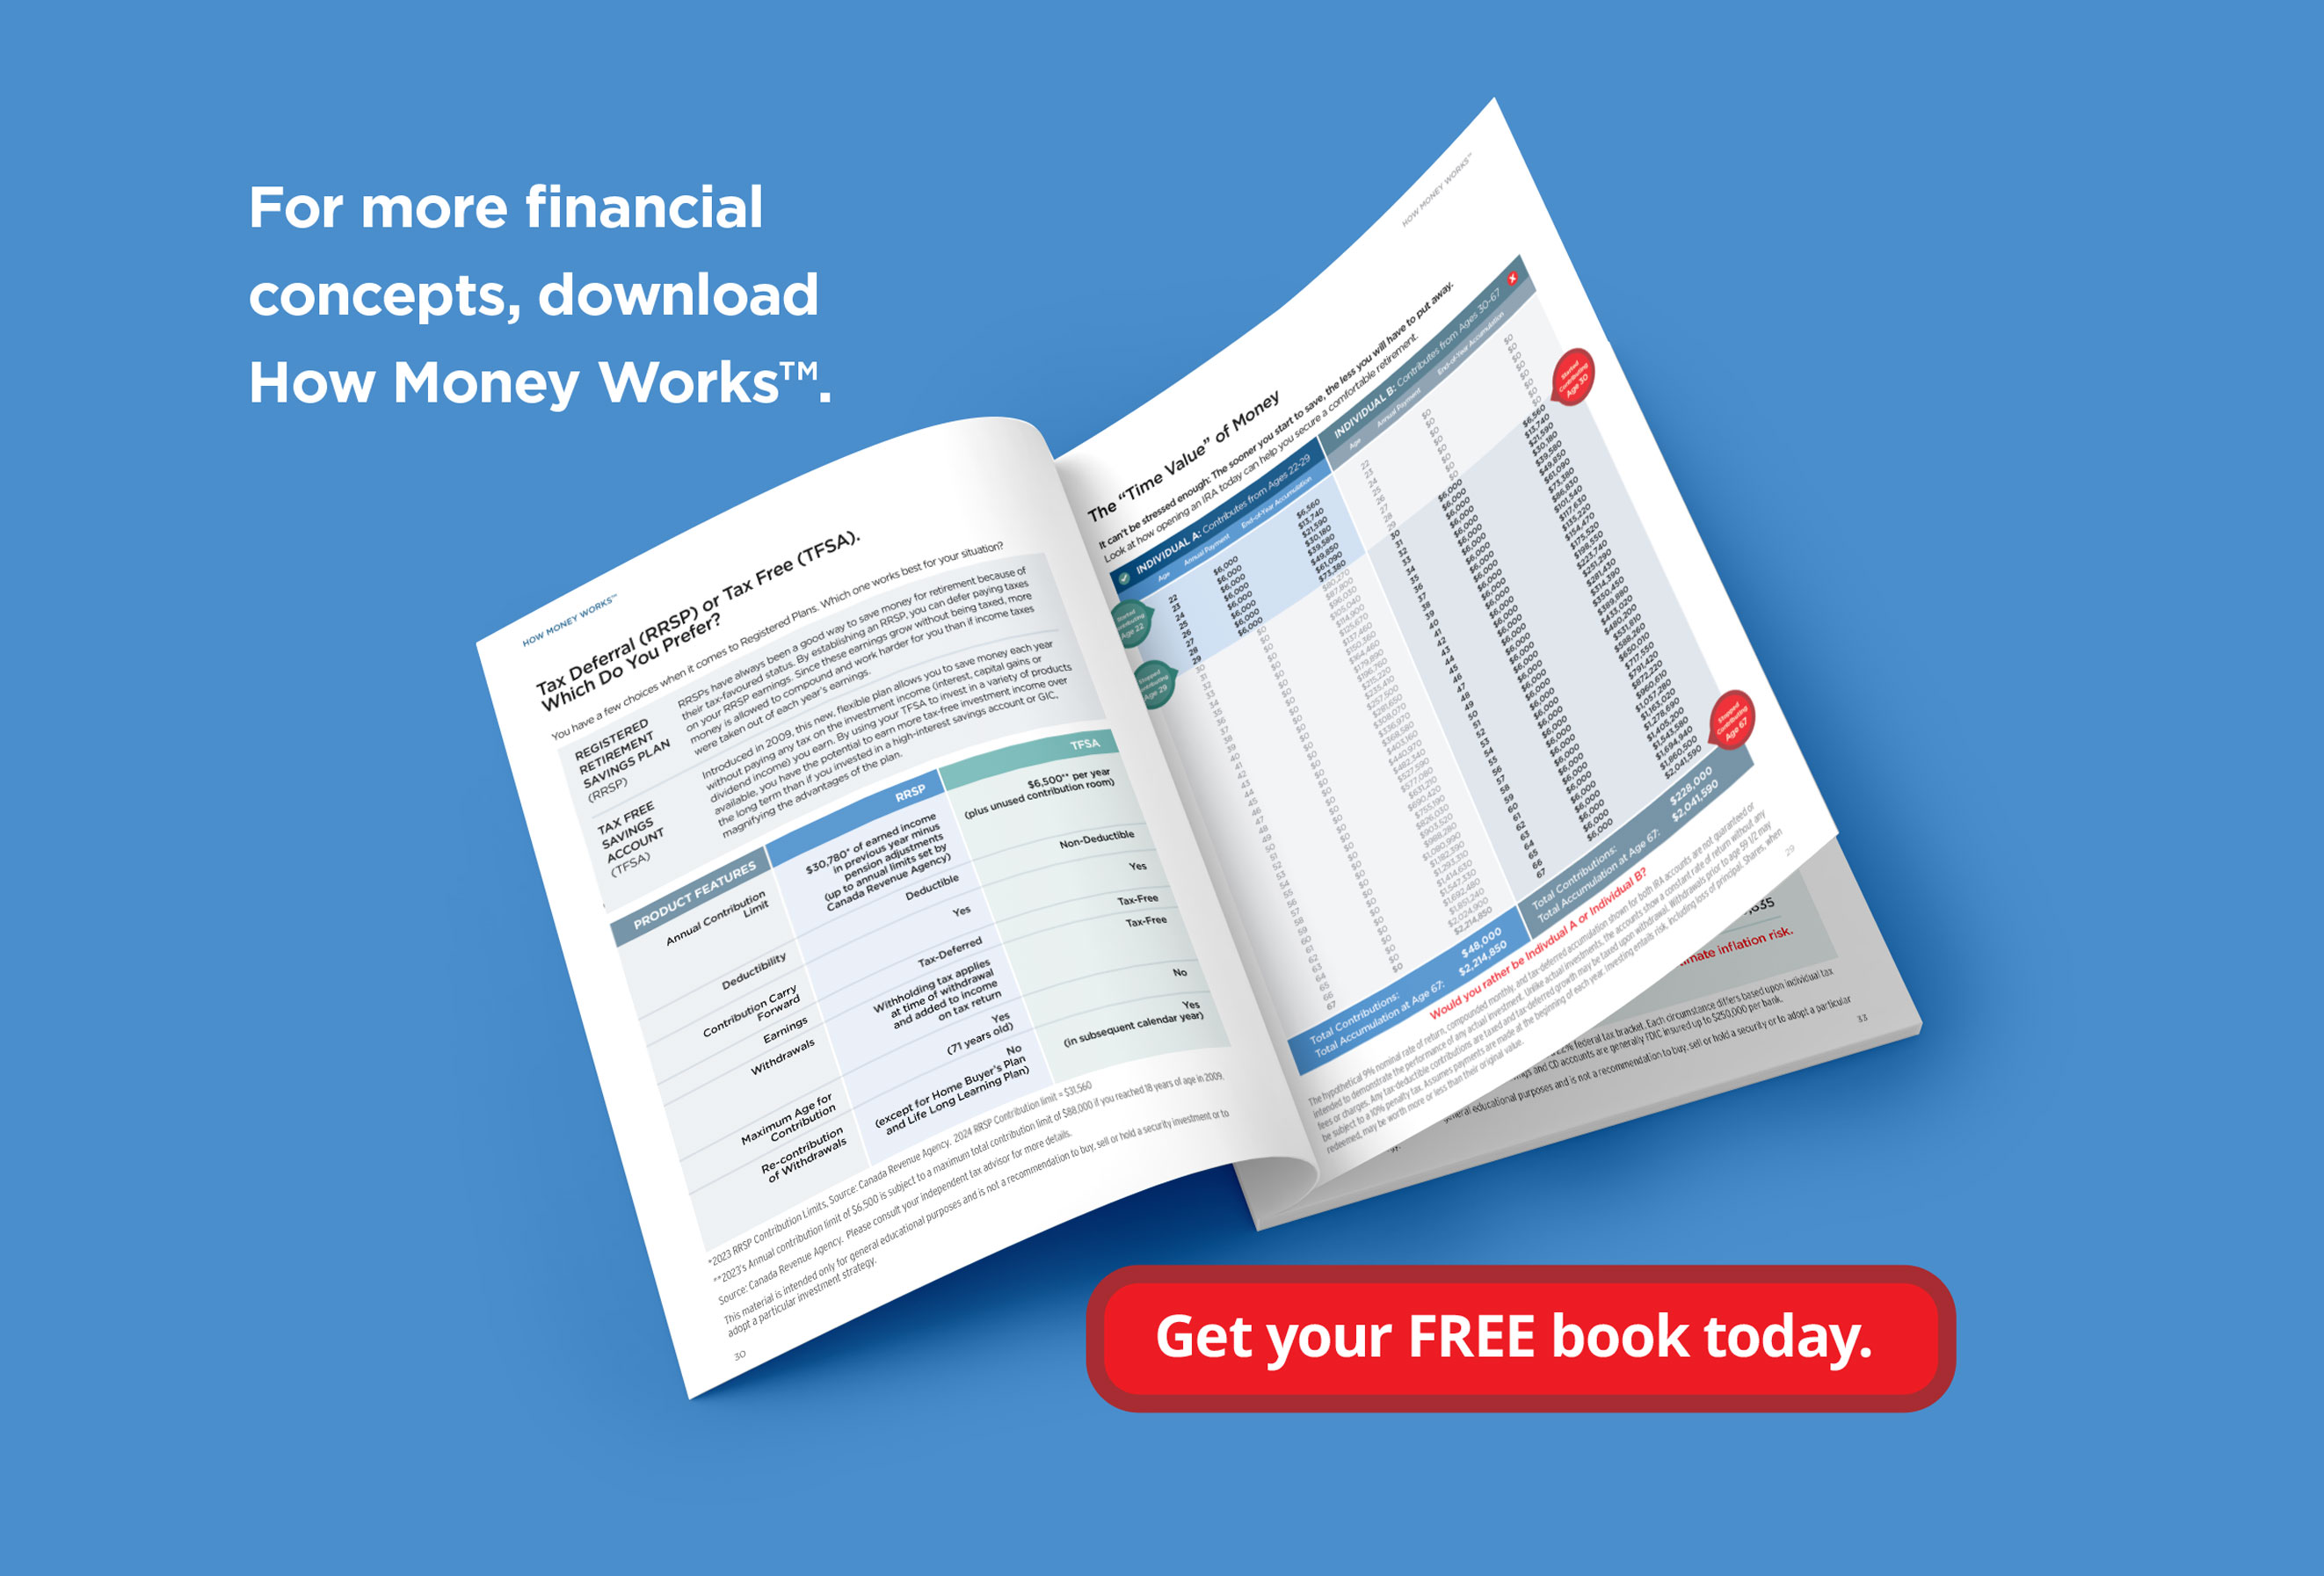 Read up on the importance of rate of return in How Money Works™. Get Your FREE copy today!